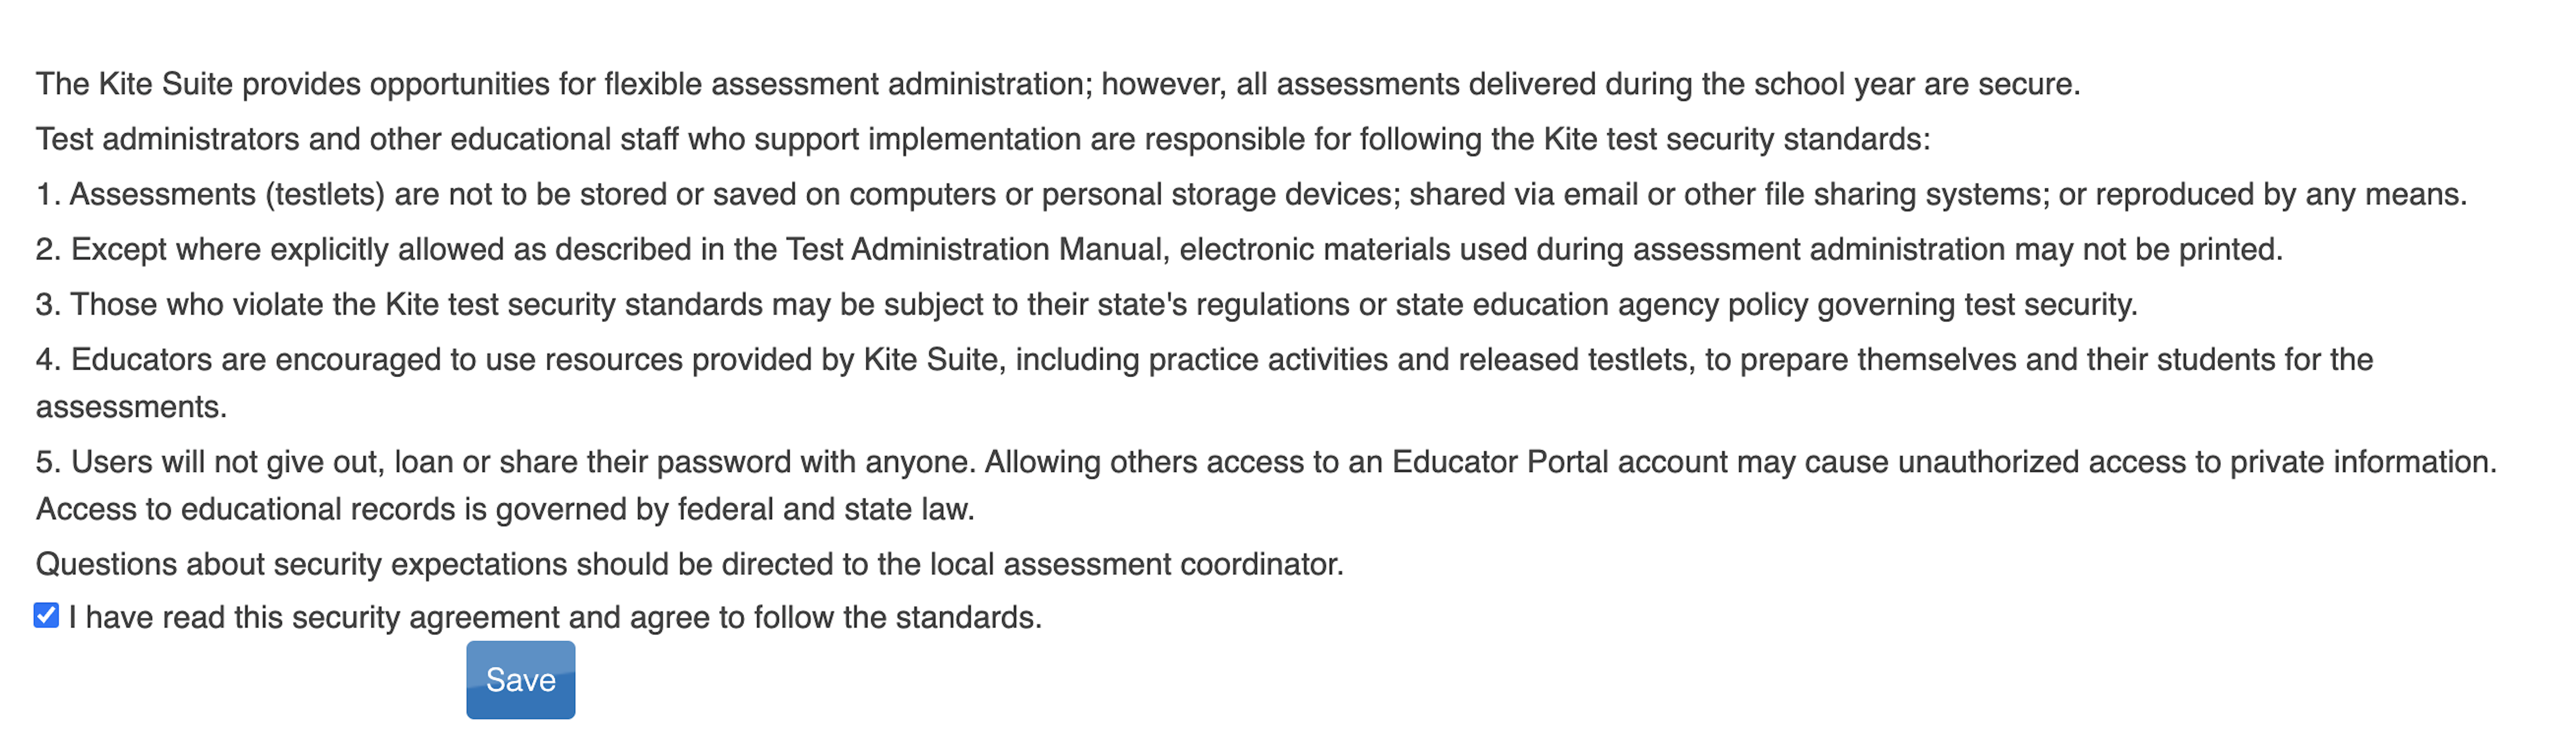 A screenshot of the test security agreement.